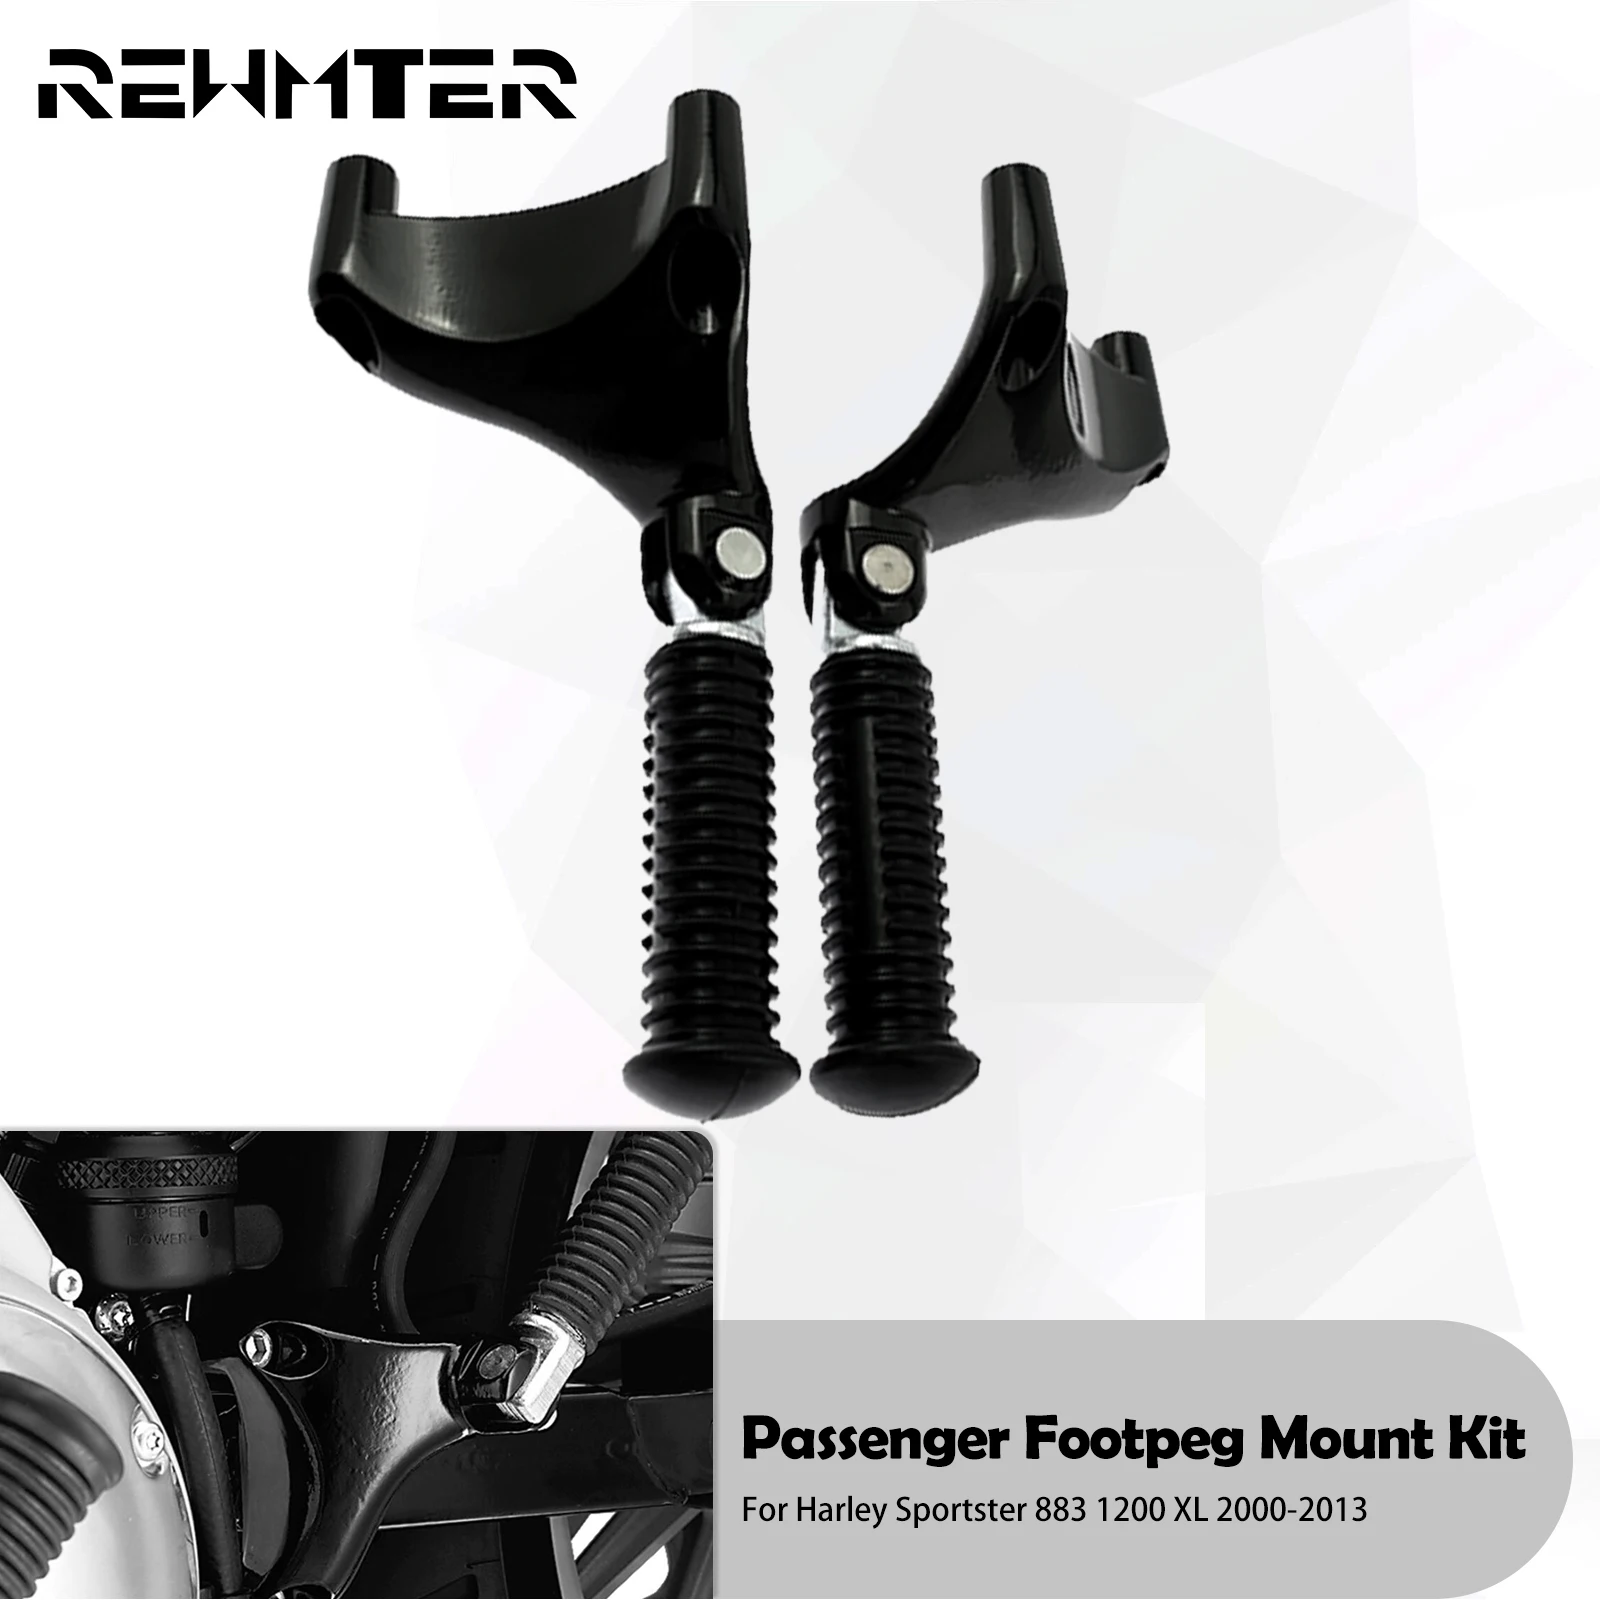 Motorcycle Rear Passenger Footpeg Mount Kit Foot Pegs Footrest Pedal For... - $52.89